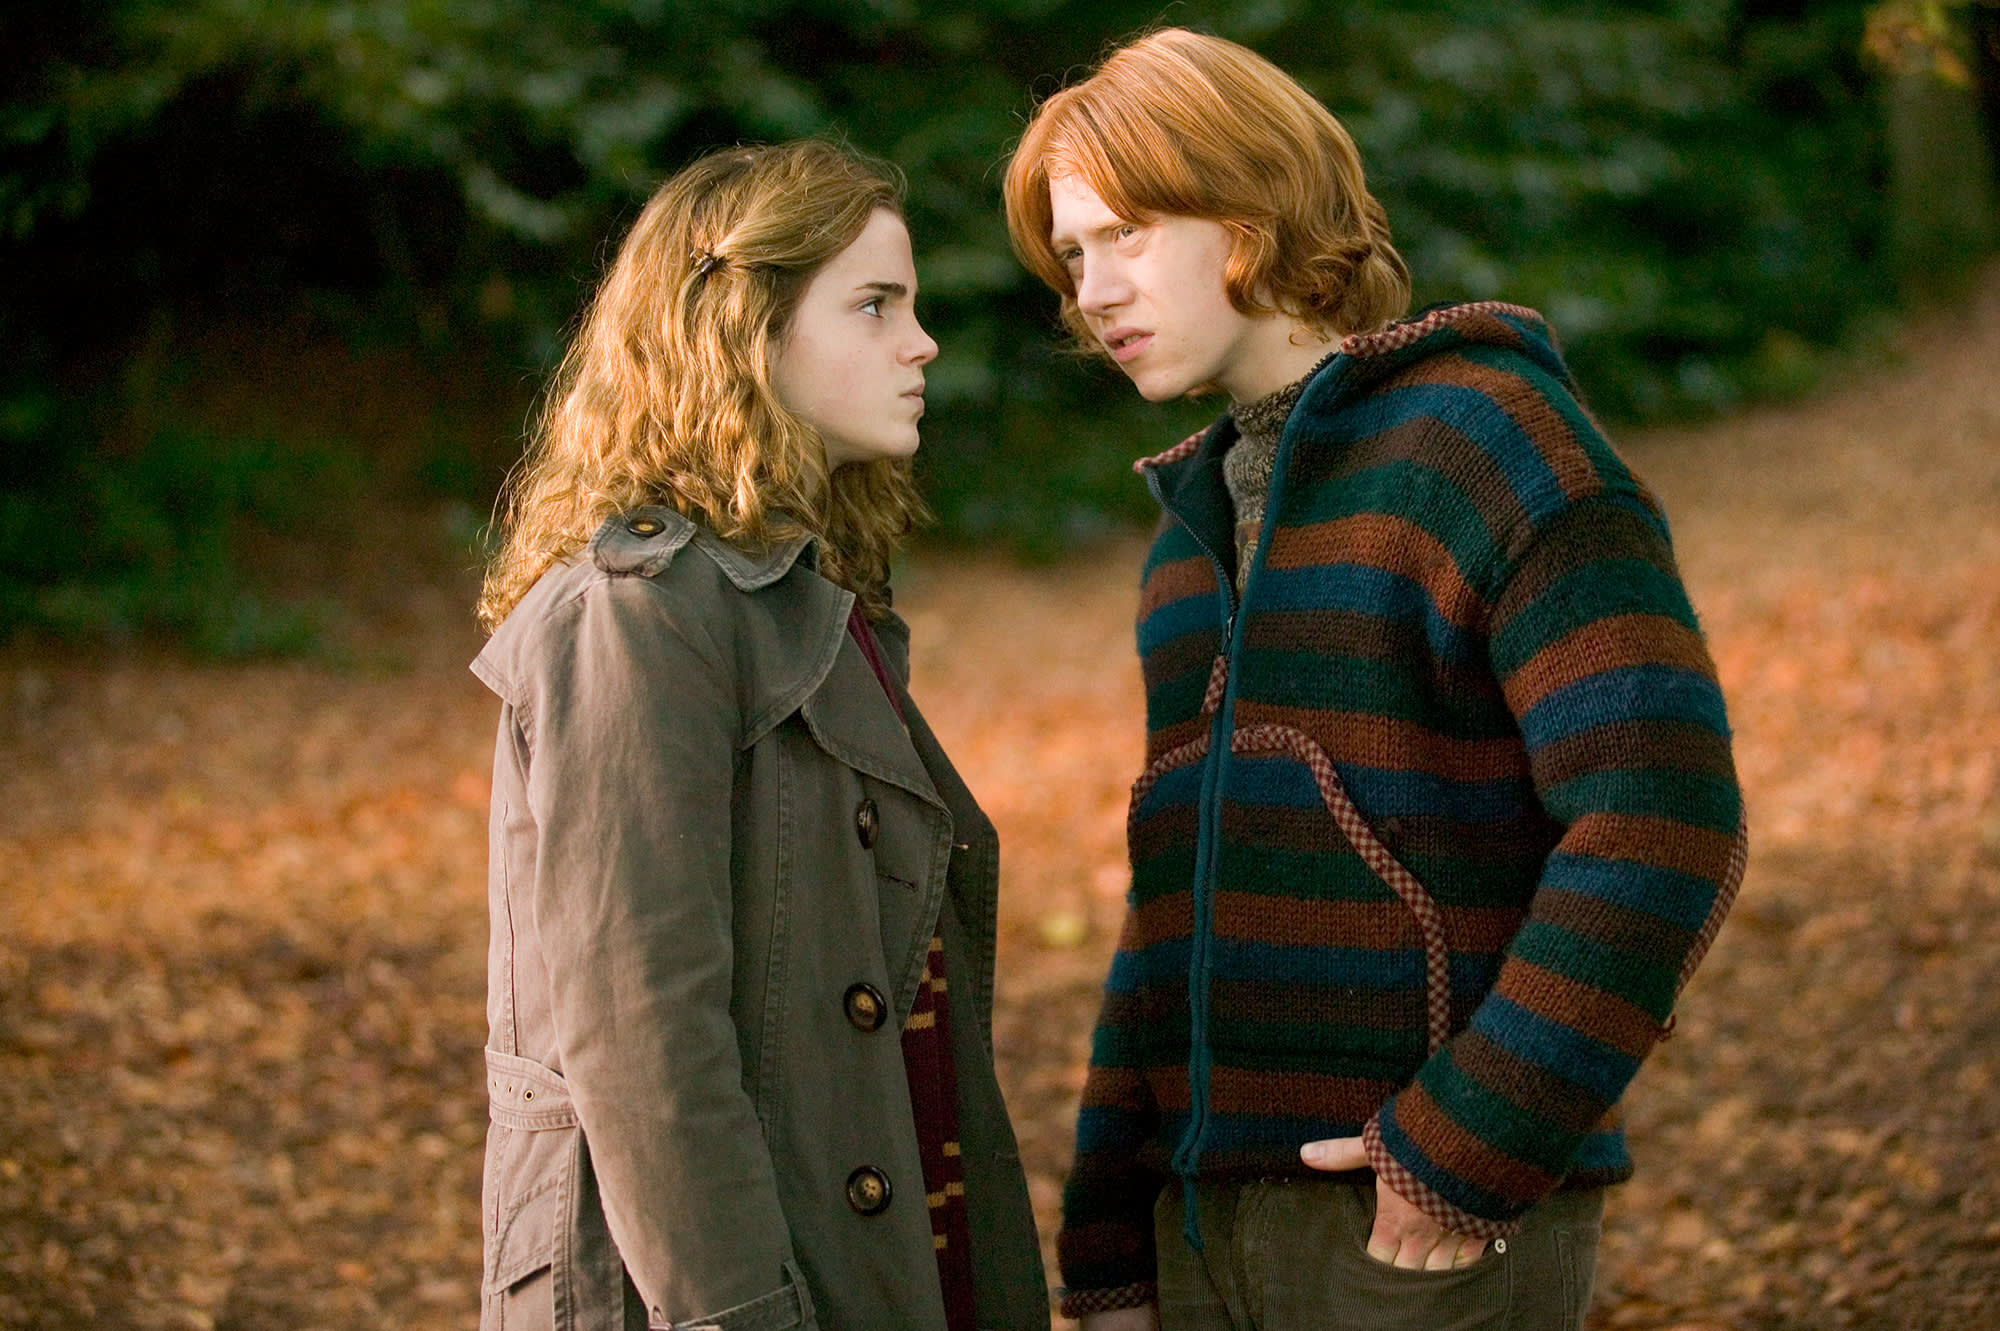 HP-F4-goblet-of-fire-hermione-ron-glaring-moment-web-landscape